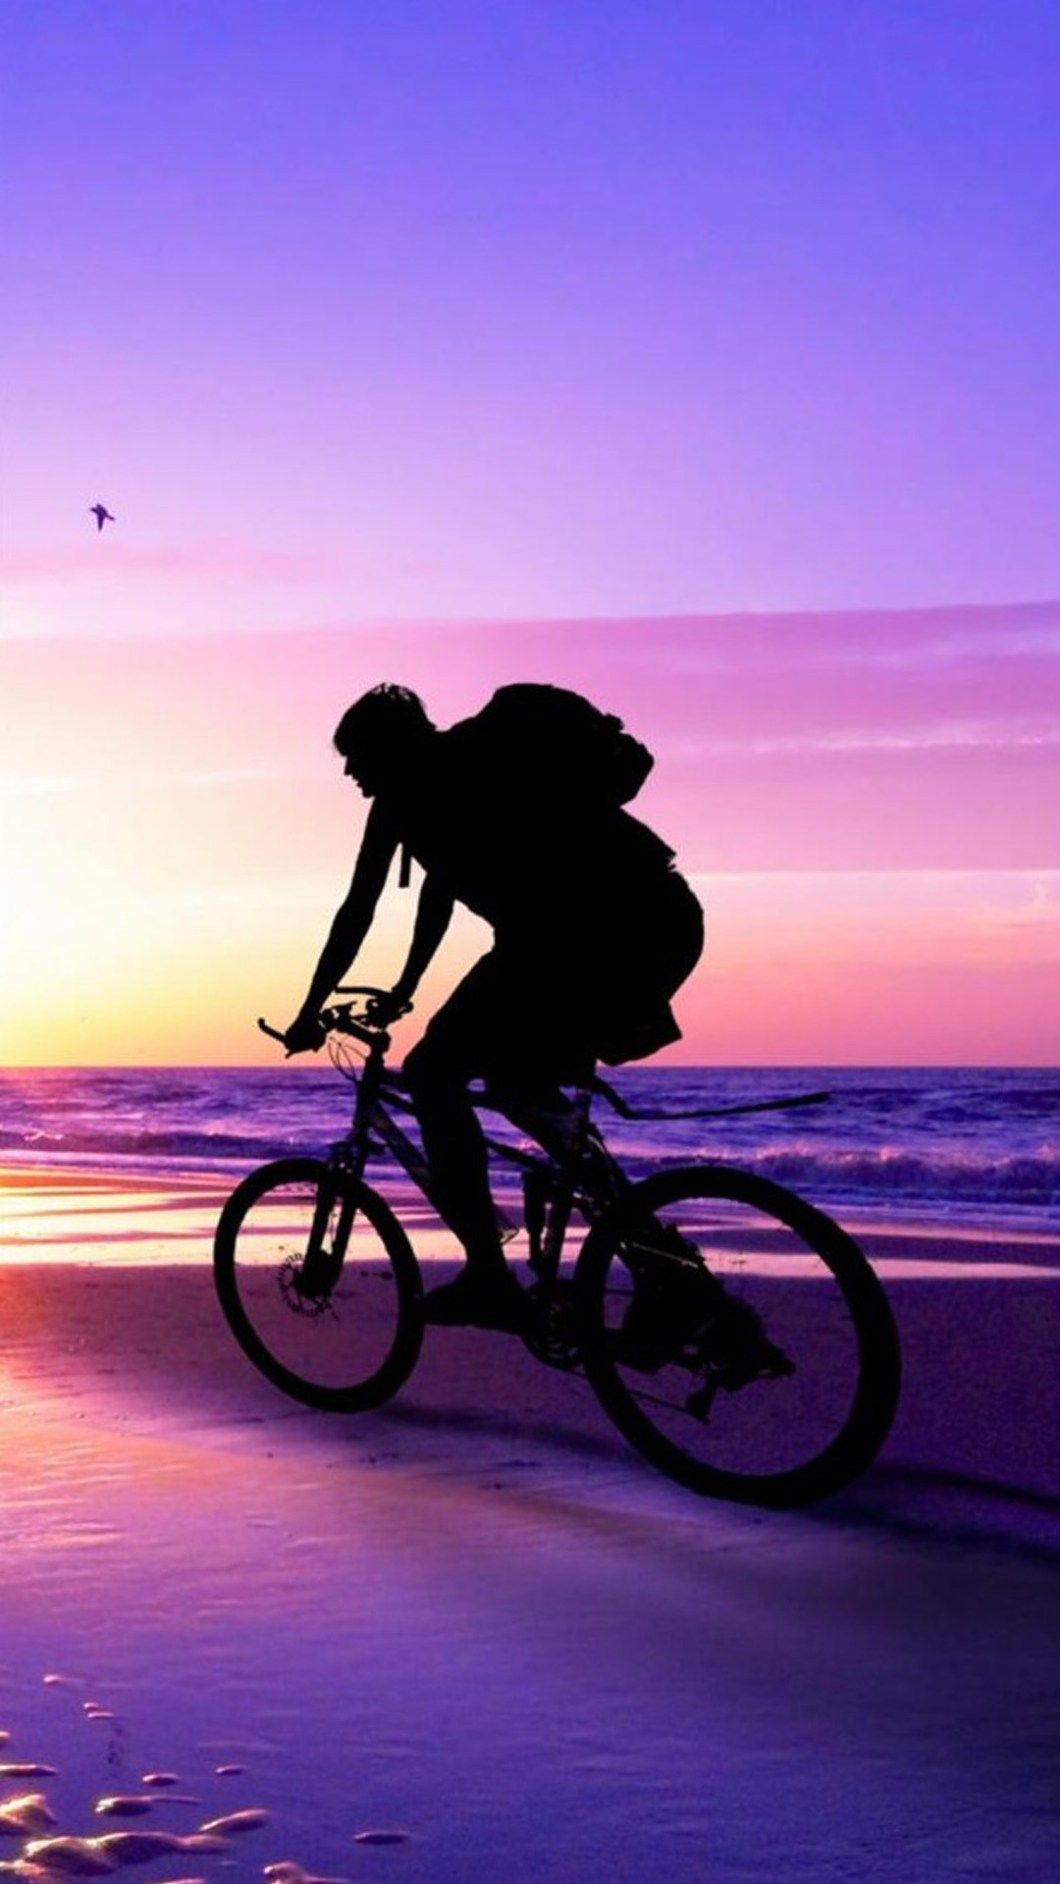 Beach Sunset Bicycle Ride iPhone 6 Plus HD Wallpaper. iPhone 6